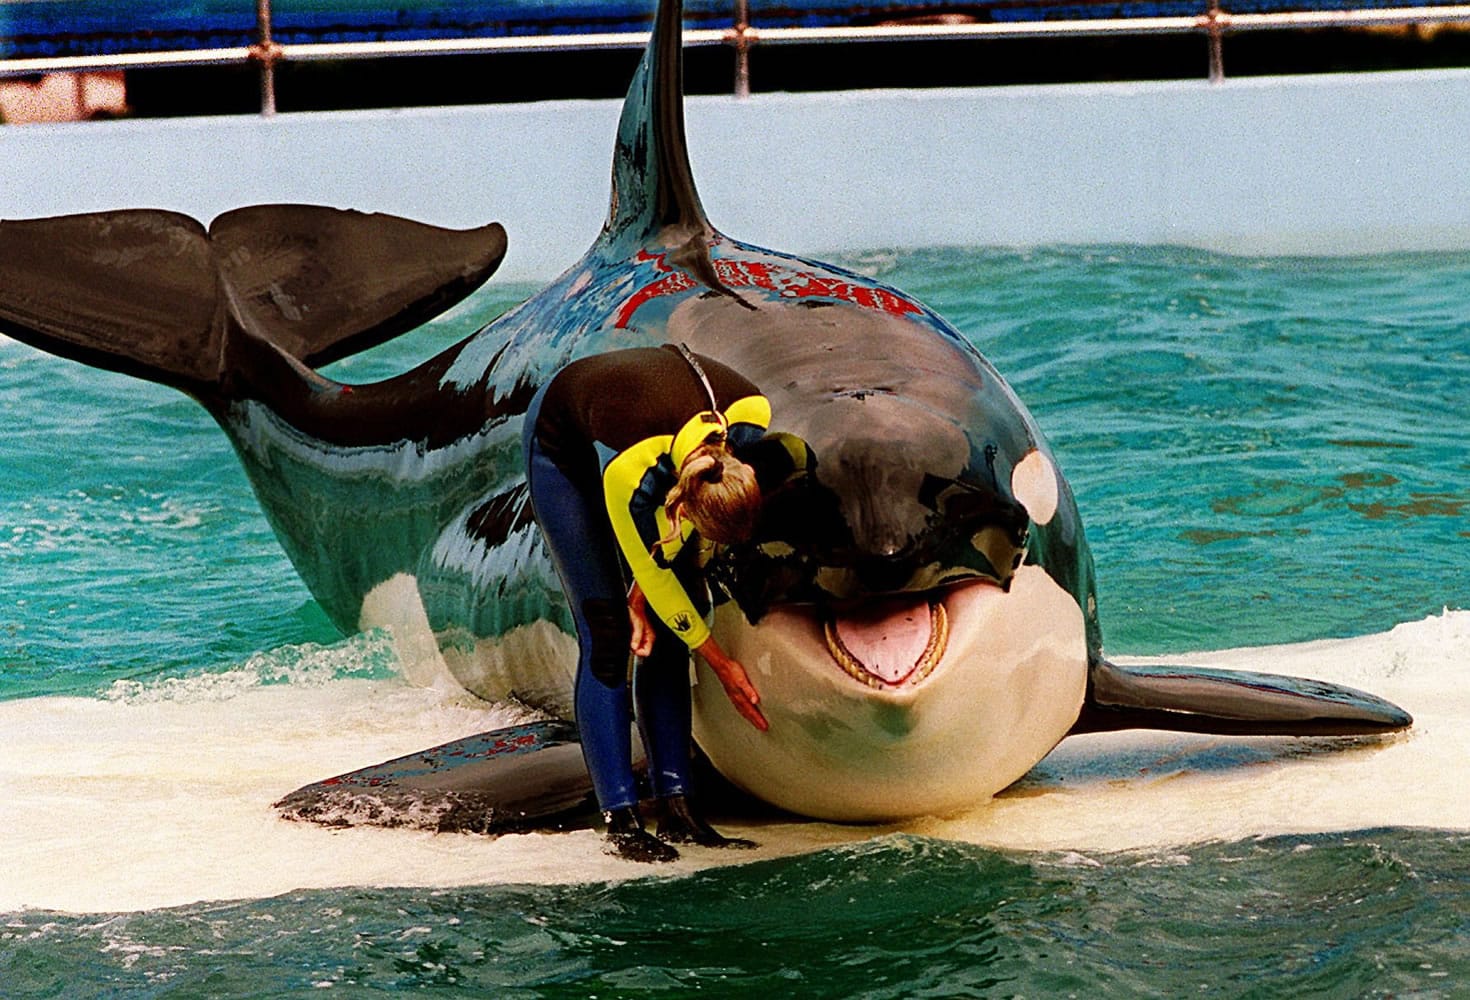 Miami Herald files
Trainer Marcia Hinton pets Lolita, a captive orca, during a performance in 1995 at the Miami Seaquarium in Miami. Lolita was taken from Puget Sound in 1970.